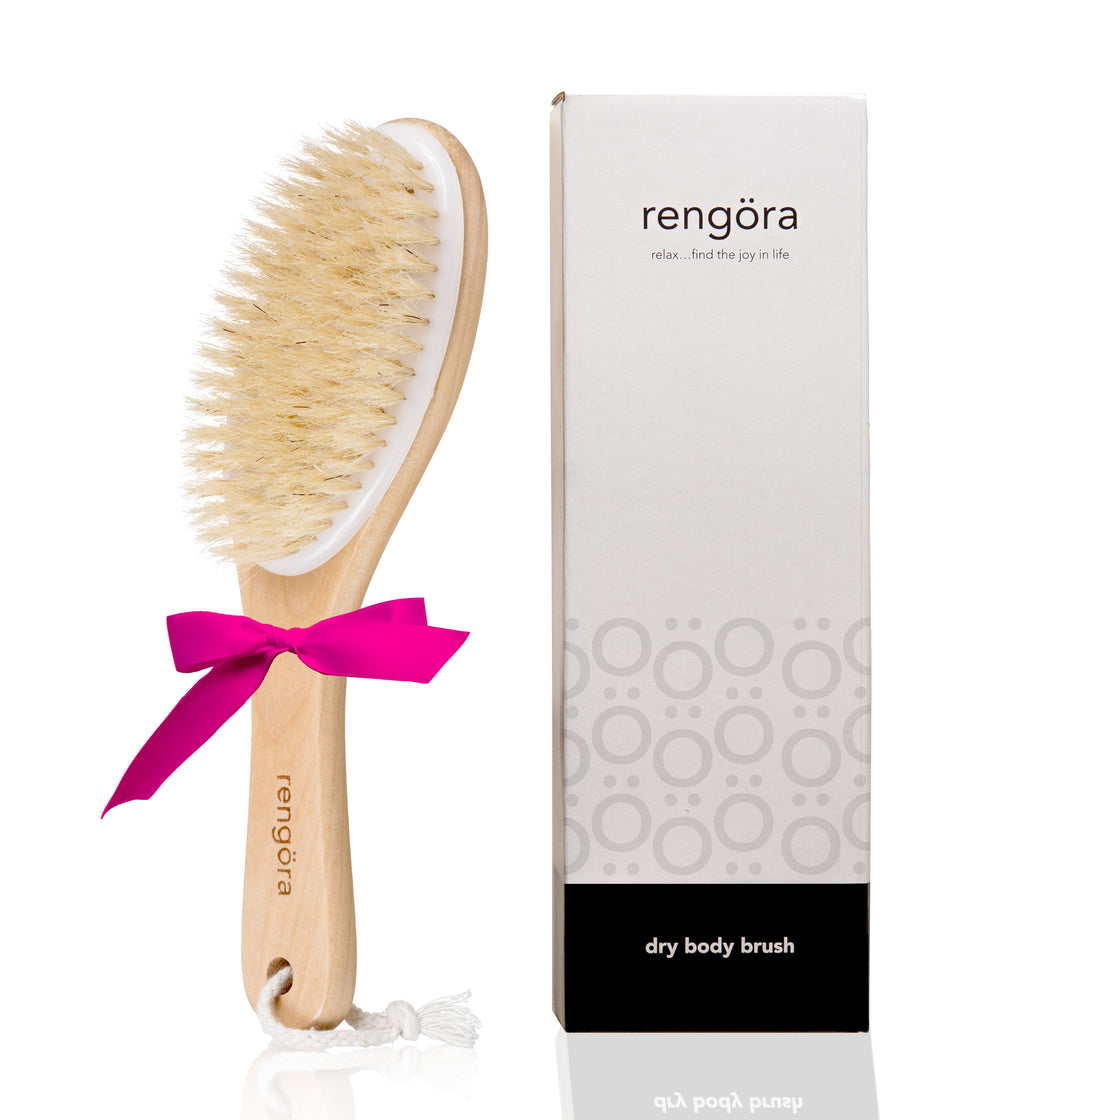 rengora's dry body brush with black and white packaging and pink bow